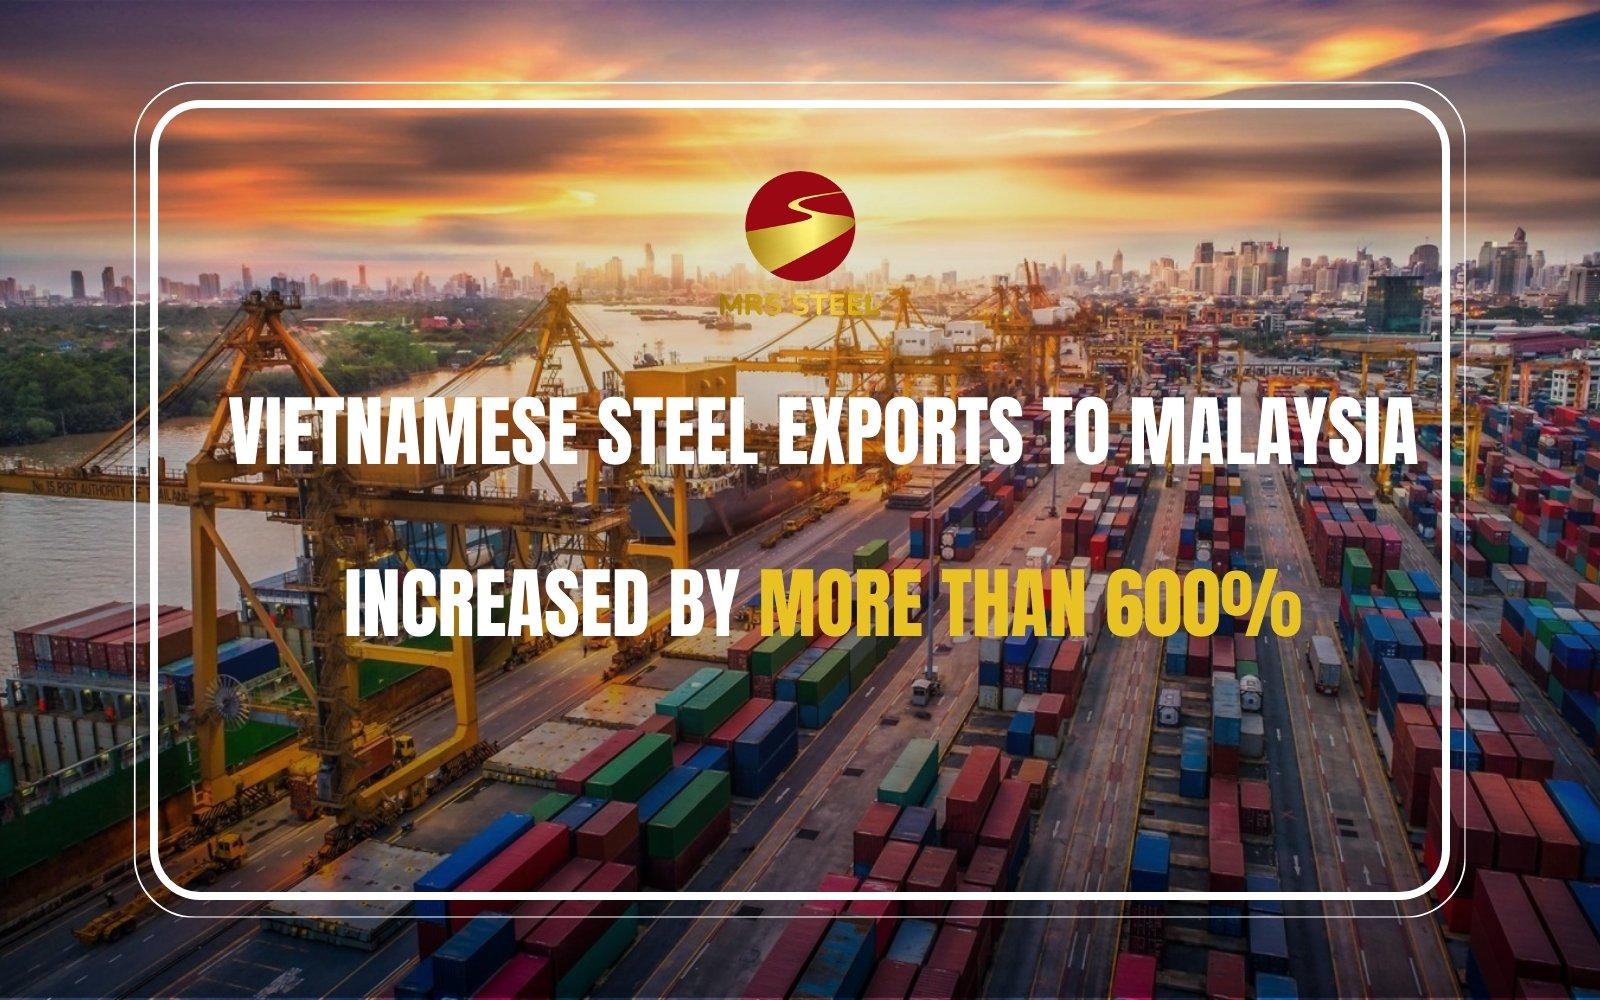 Vietnamese steel exports to Malaysia increased by more than 600%